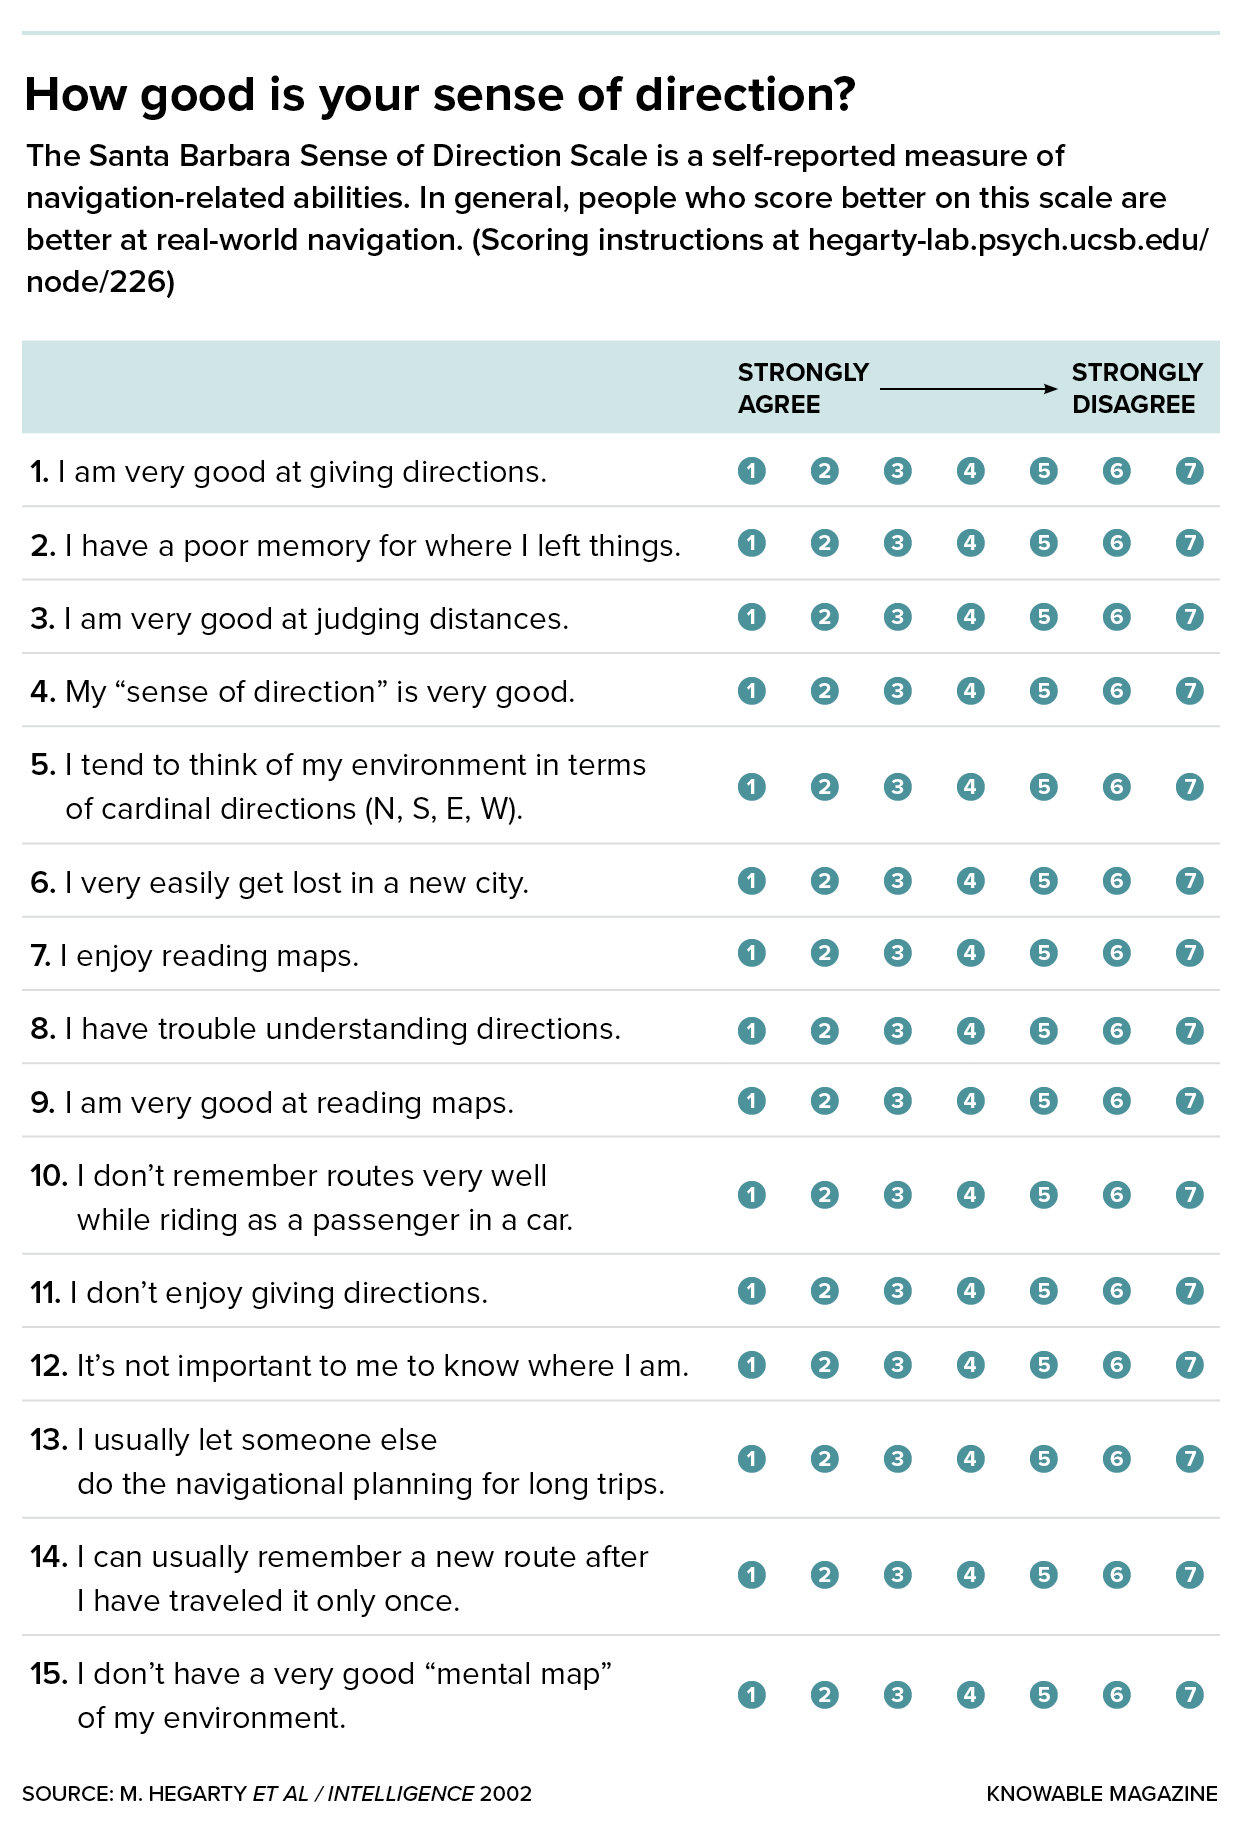 A 15-item questionnaire to measure people’s evaluation of their sense of direction 